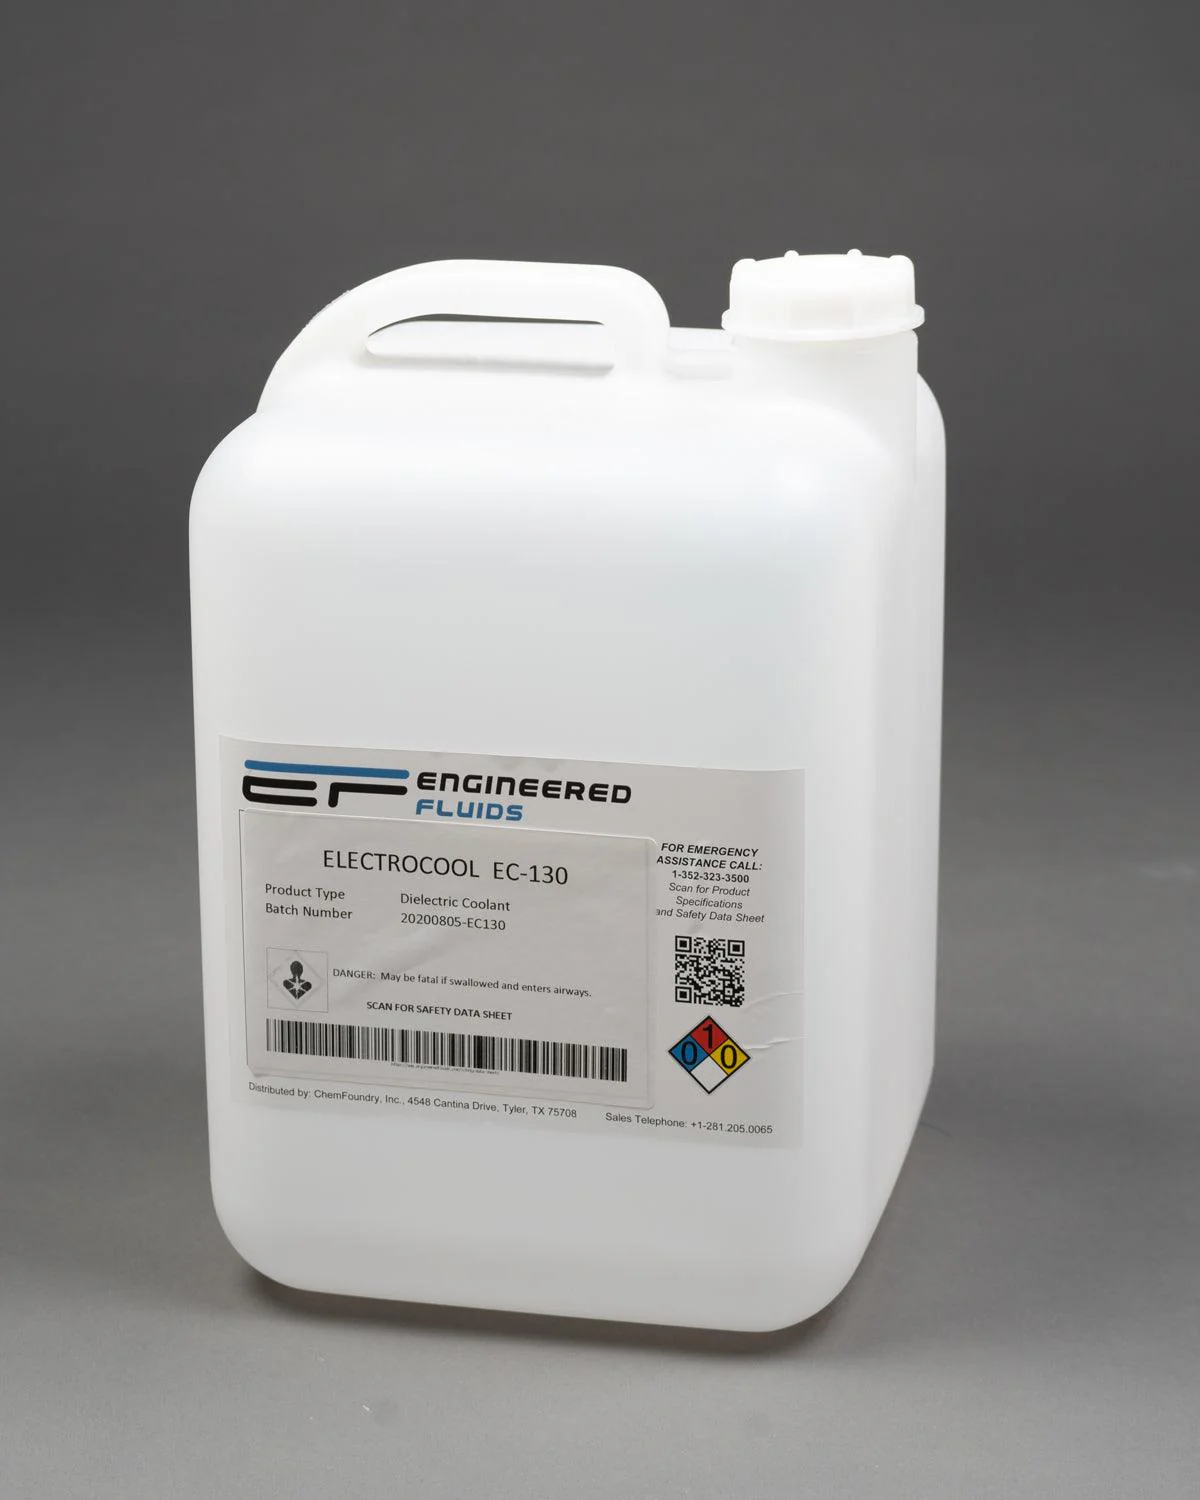 Would the coolant dissolve silicon or other adhesives? Also what type of composite is the coolant transported in?